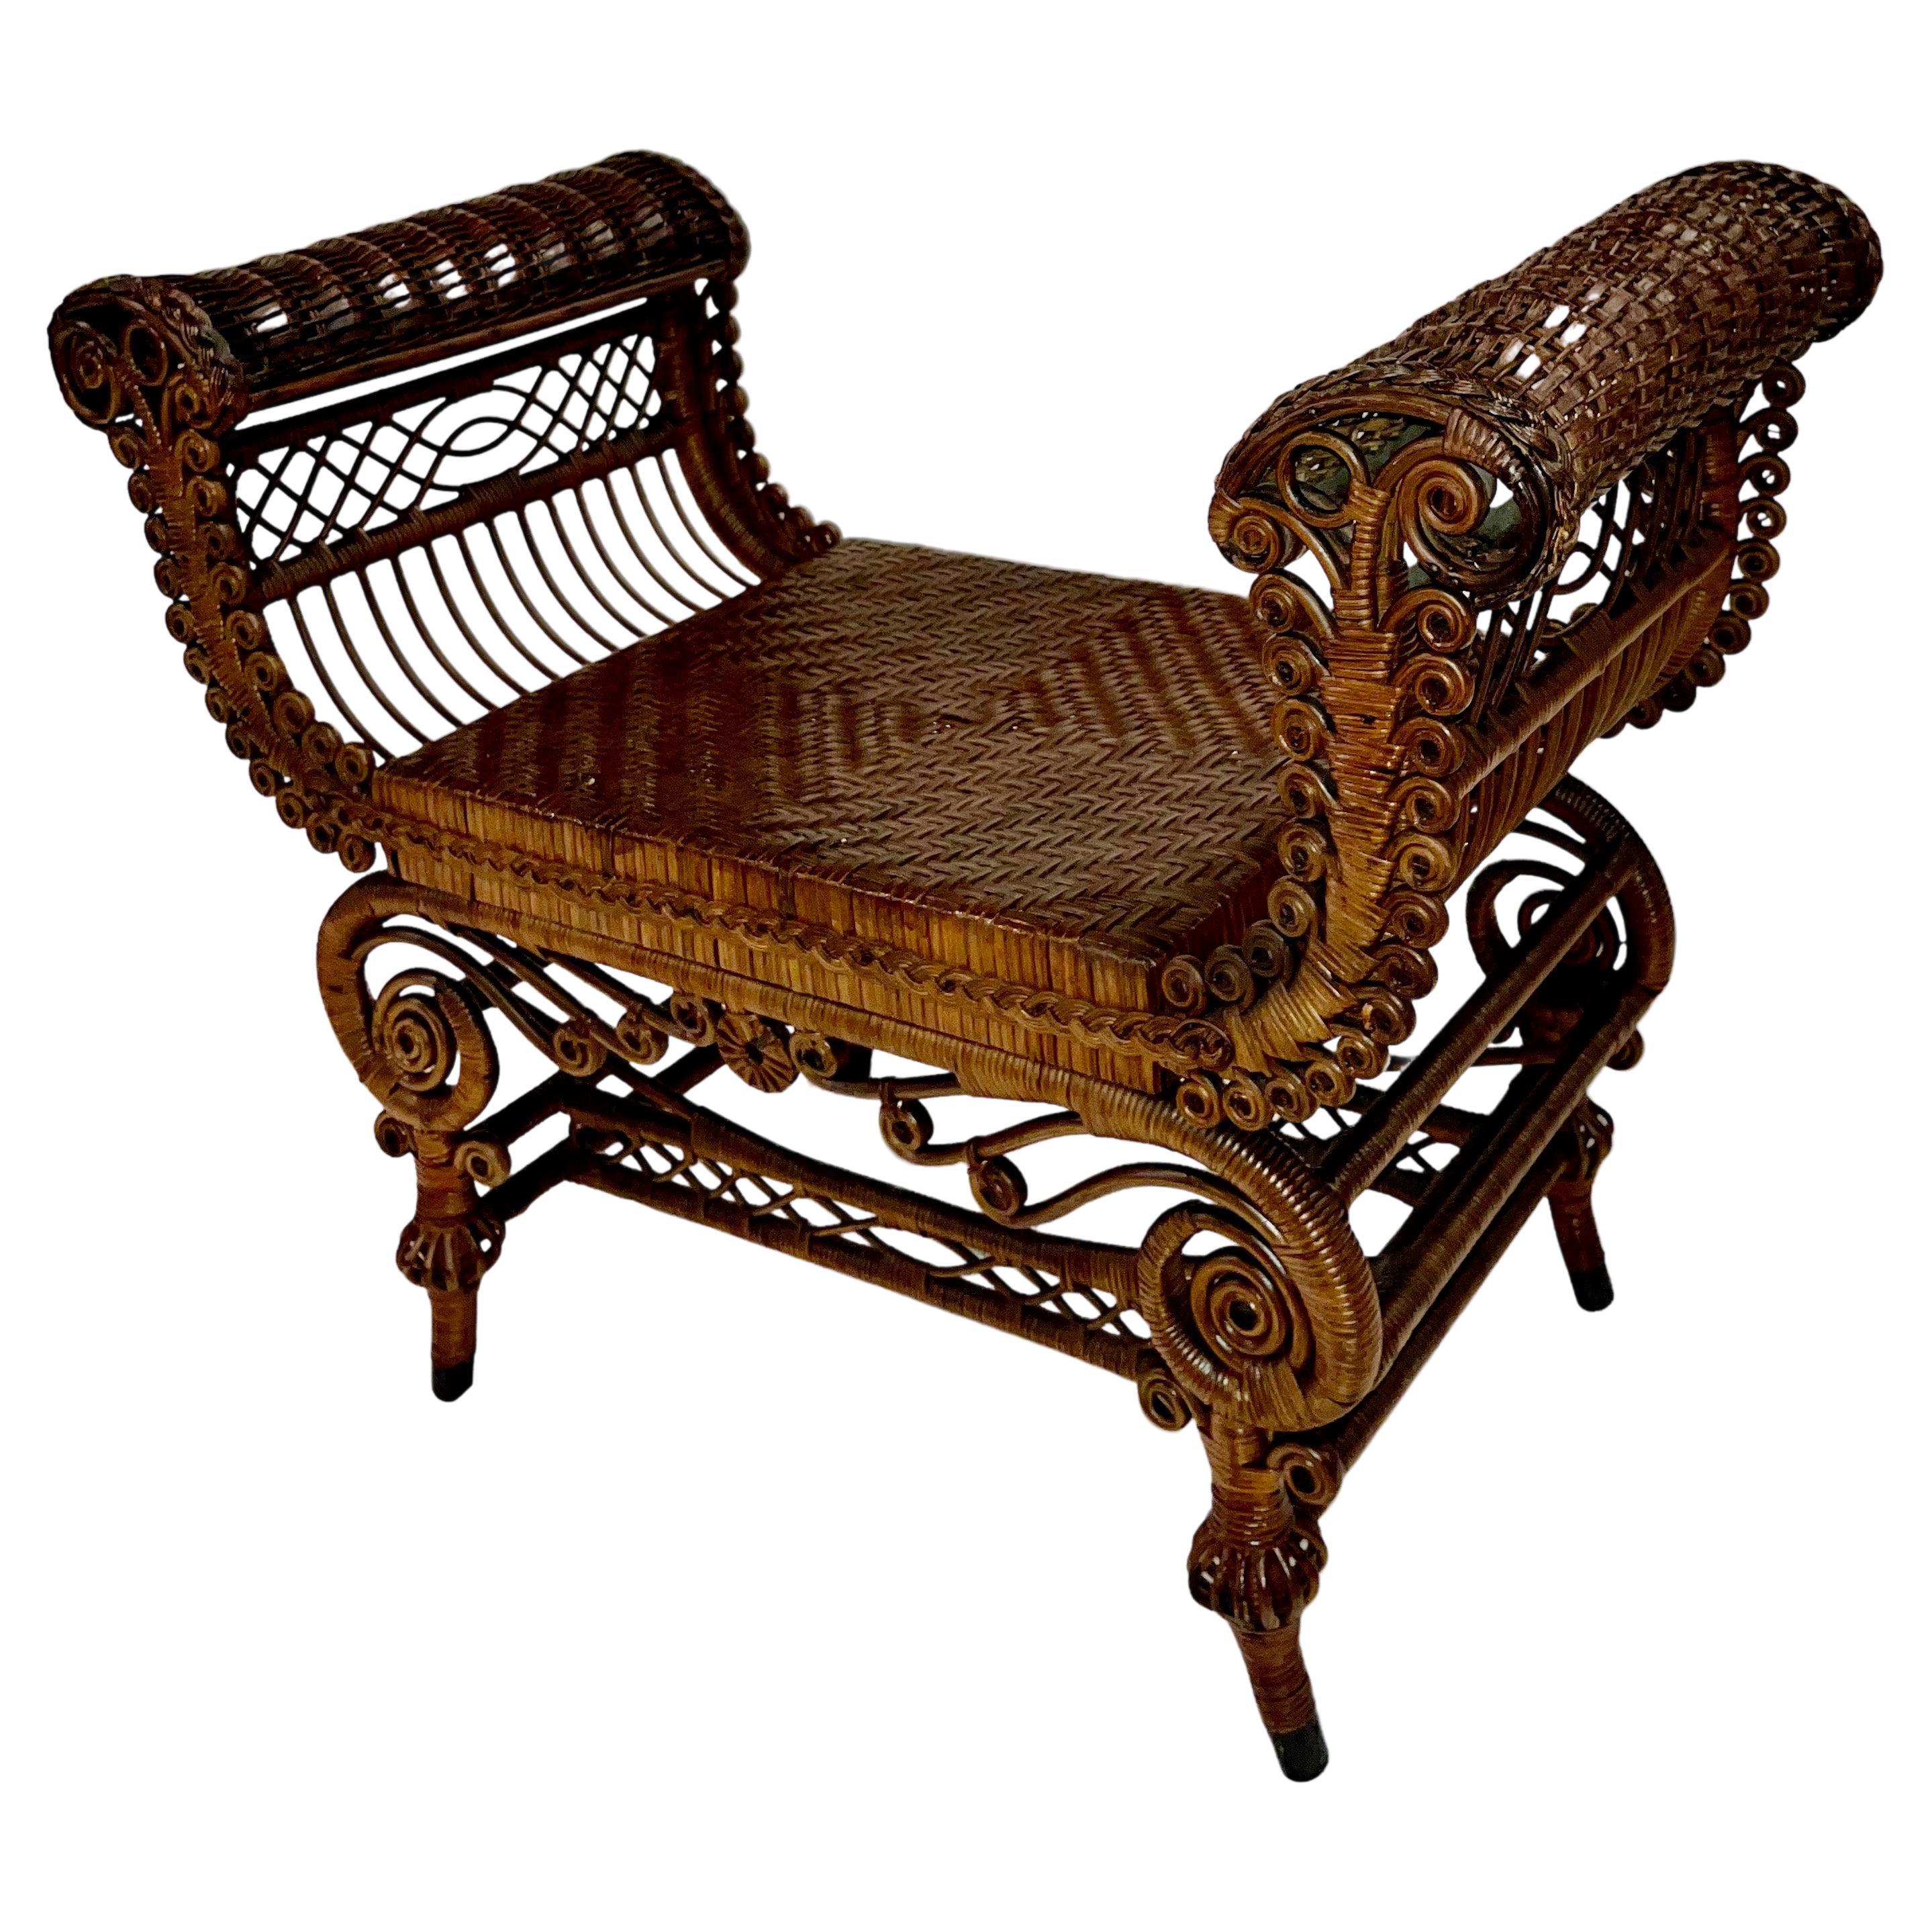 Elaborately Decorated Antique Wicker Turkish Bench in Natural Finish